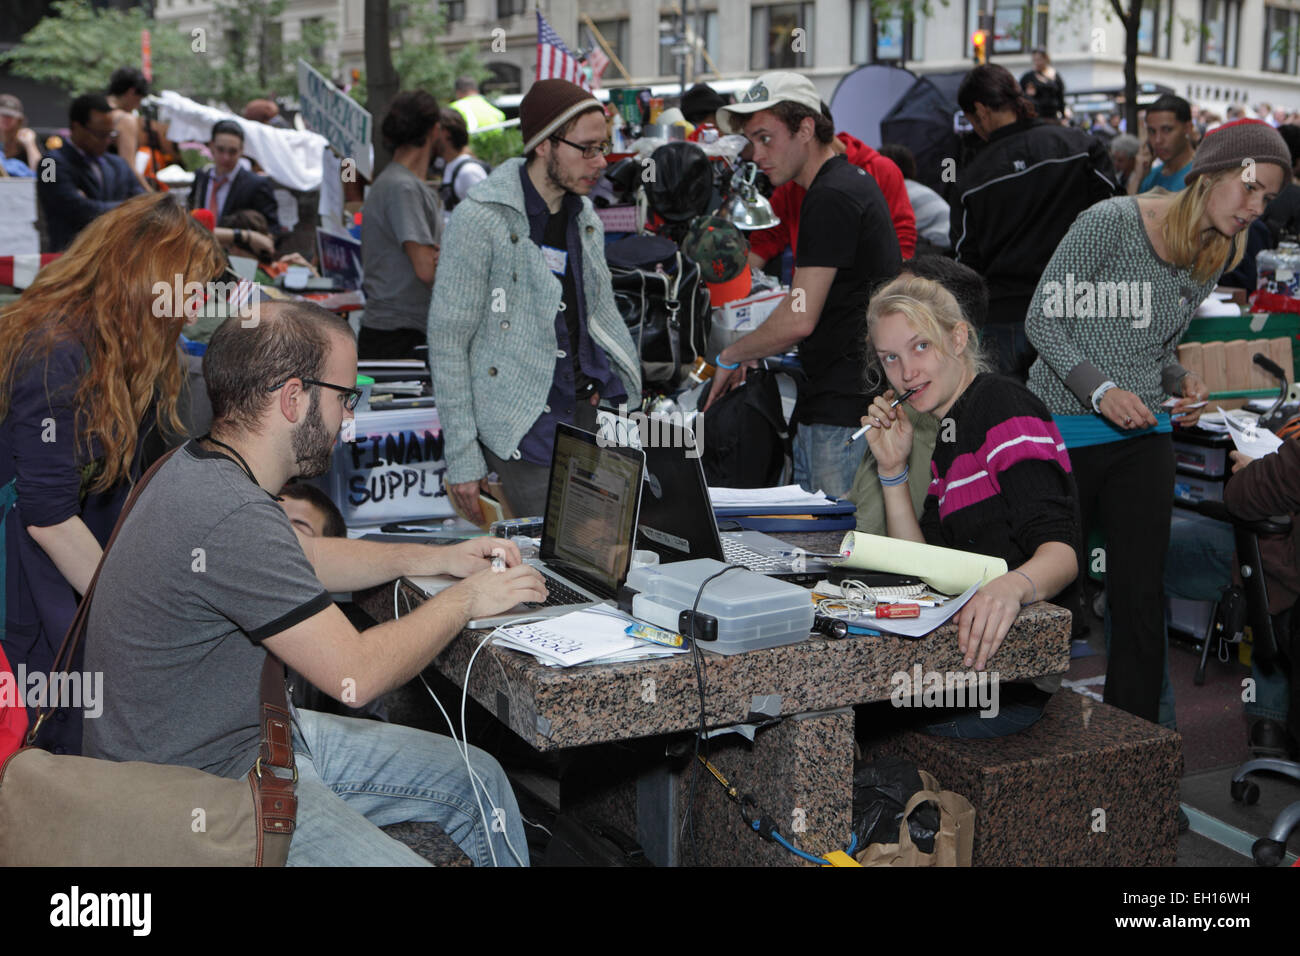 Media desk in action at the Occupy Wall Street protest in Zuccotti Park, New York Stock Photo